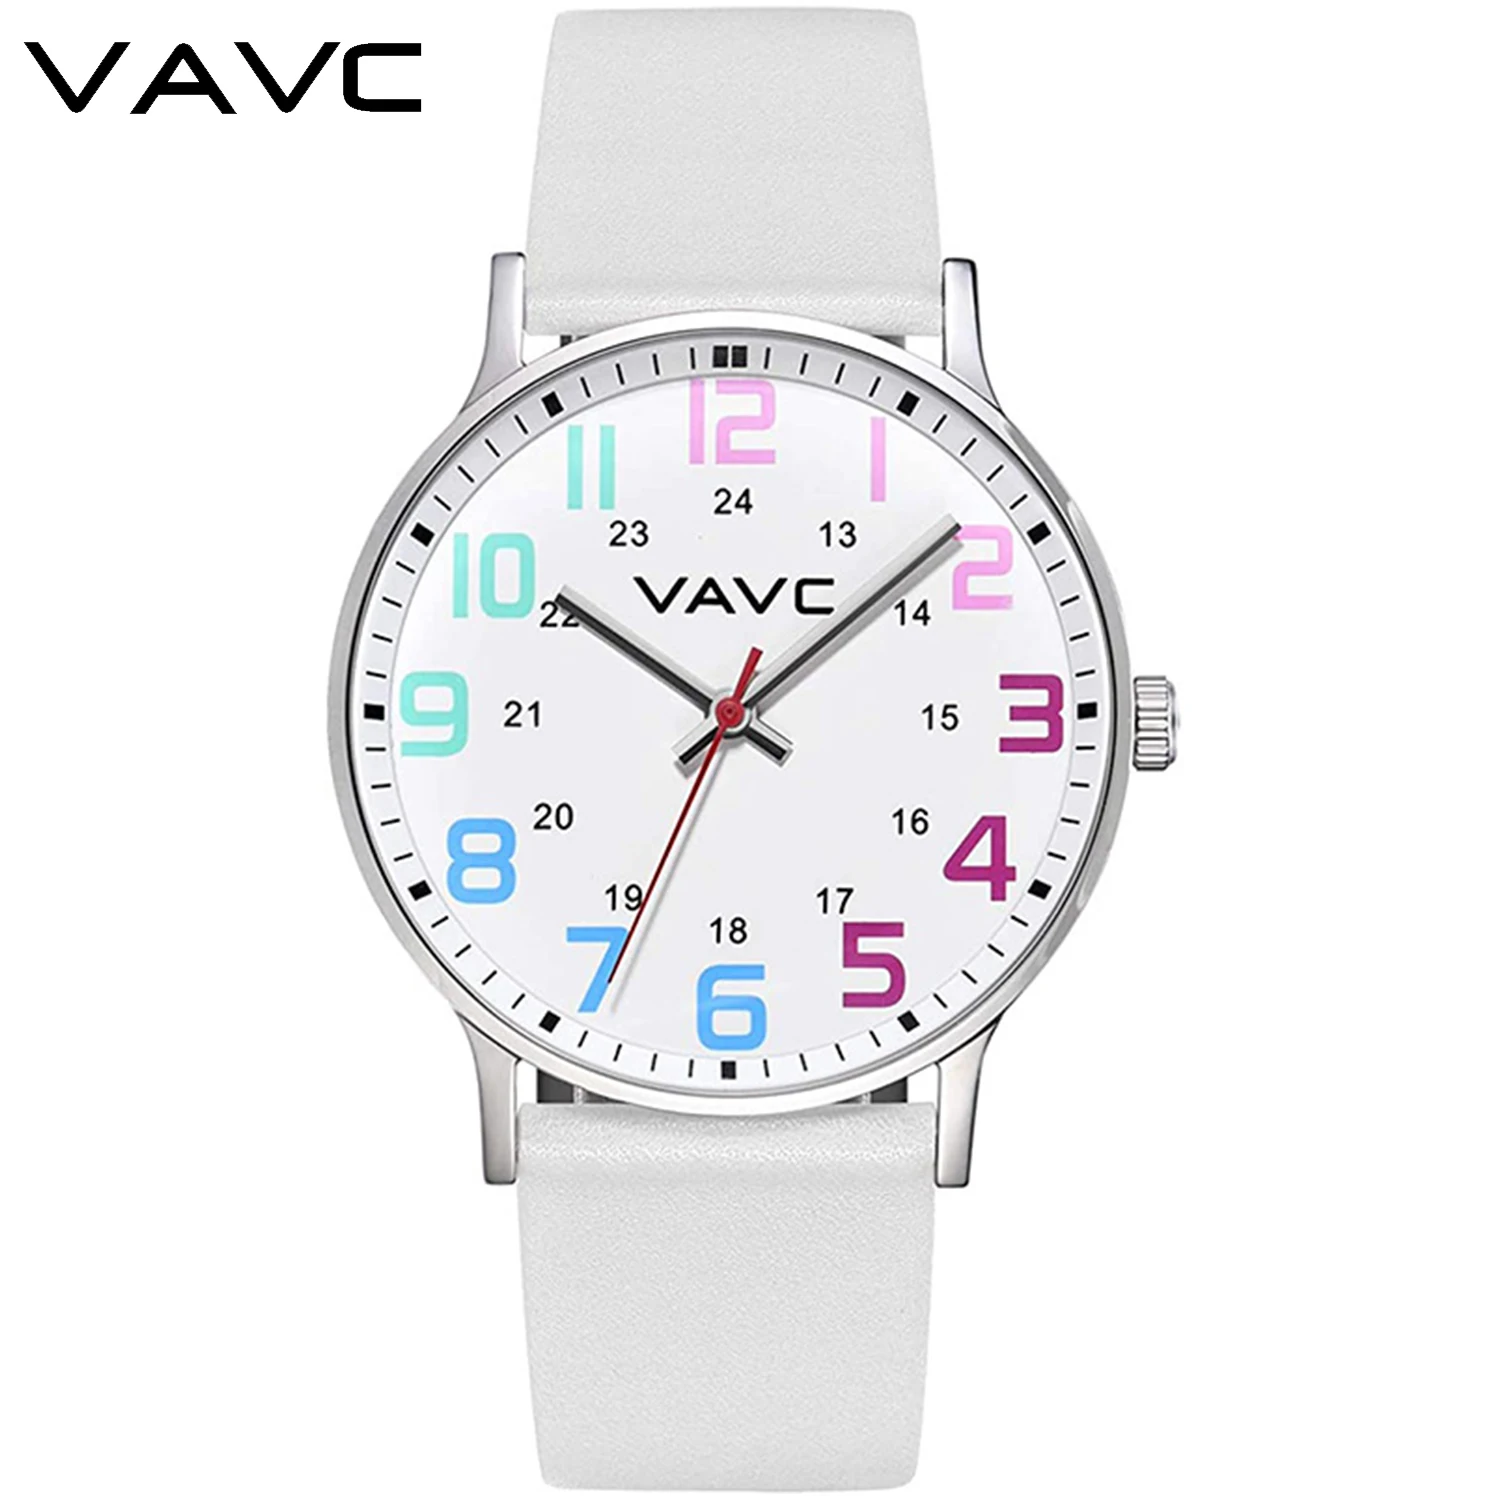 VAVC Watch for Women Fashion Fourcolor Large Dial Digital Watch Leather Strap Quartz Dress Wristwatches Easy To Read Reloj Mujer